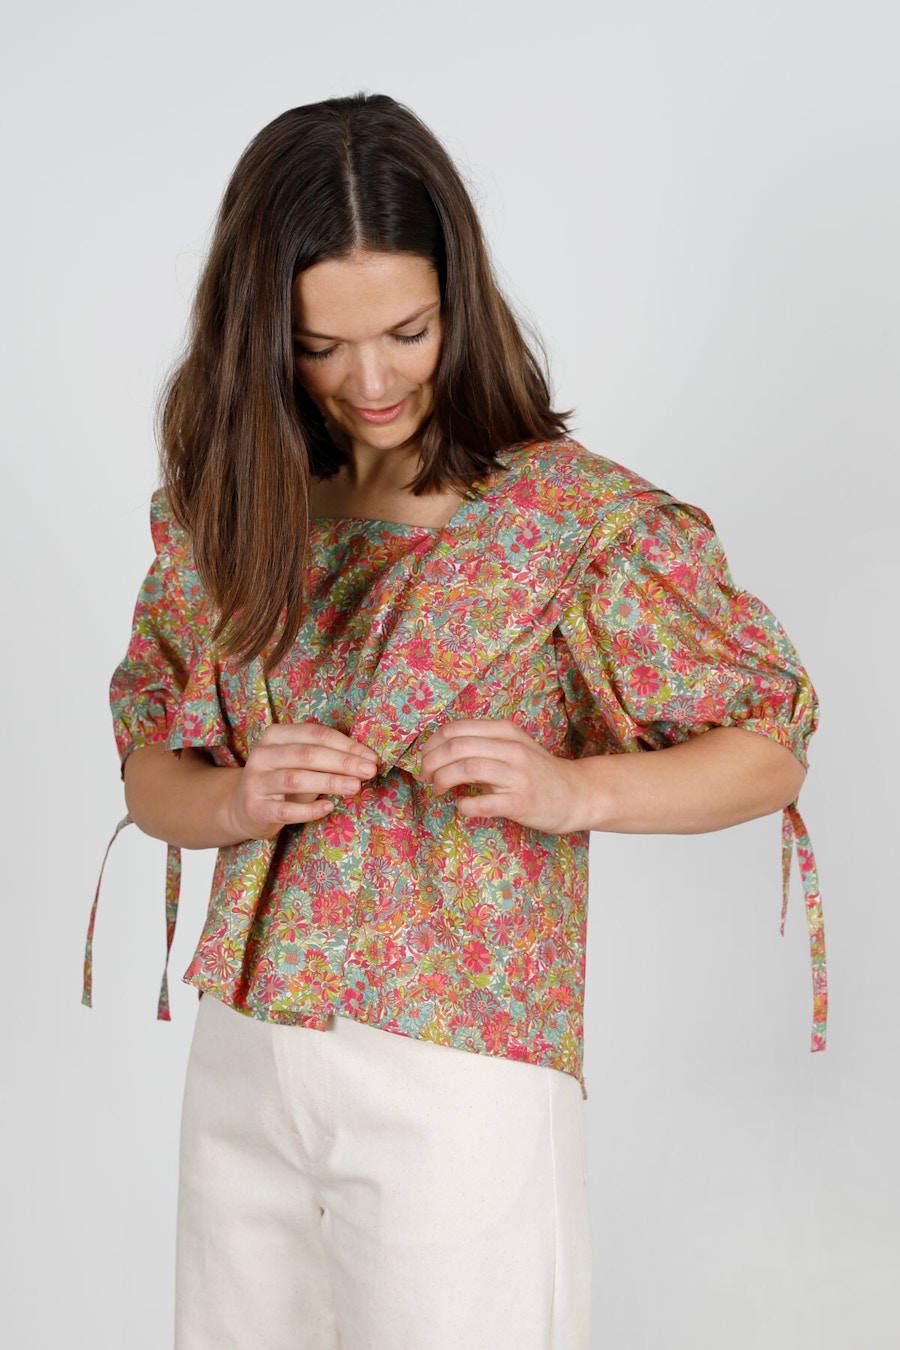 Layers Lysimaque Paqerette Blouse Liberty Tana Lawn The Fabric Store